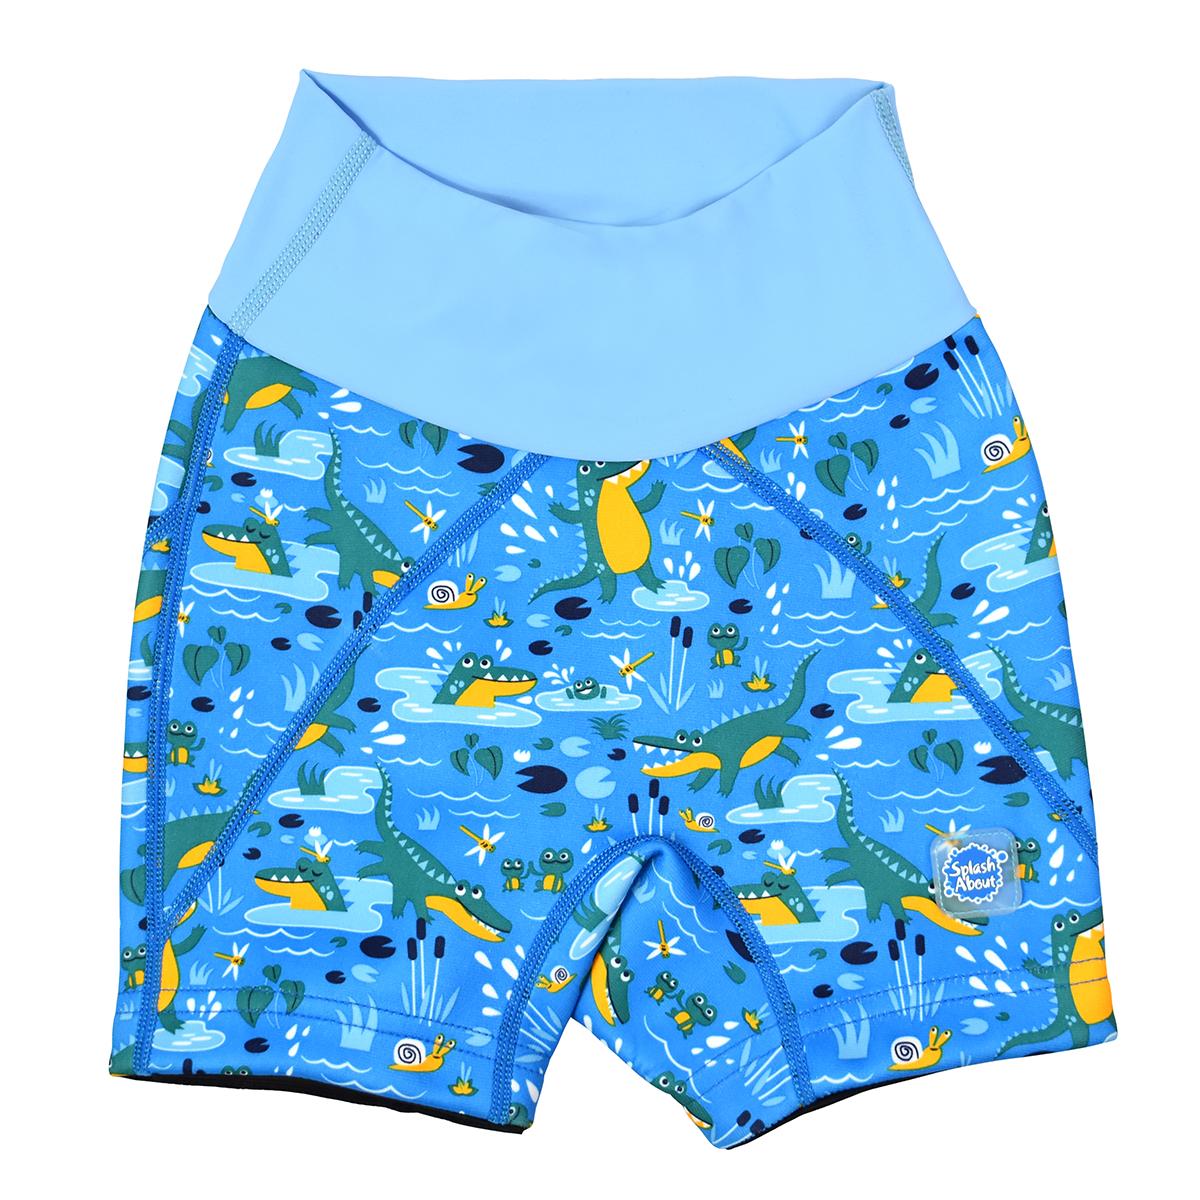 Neoprene swim shorts in blue with light blue waist and swamp themed print, including crocodiles, frogs, snails and more. Front.